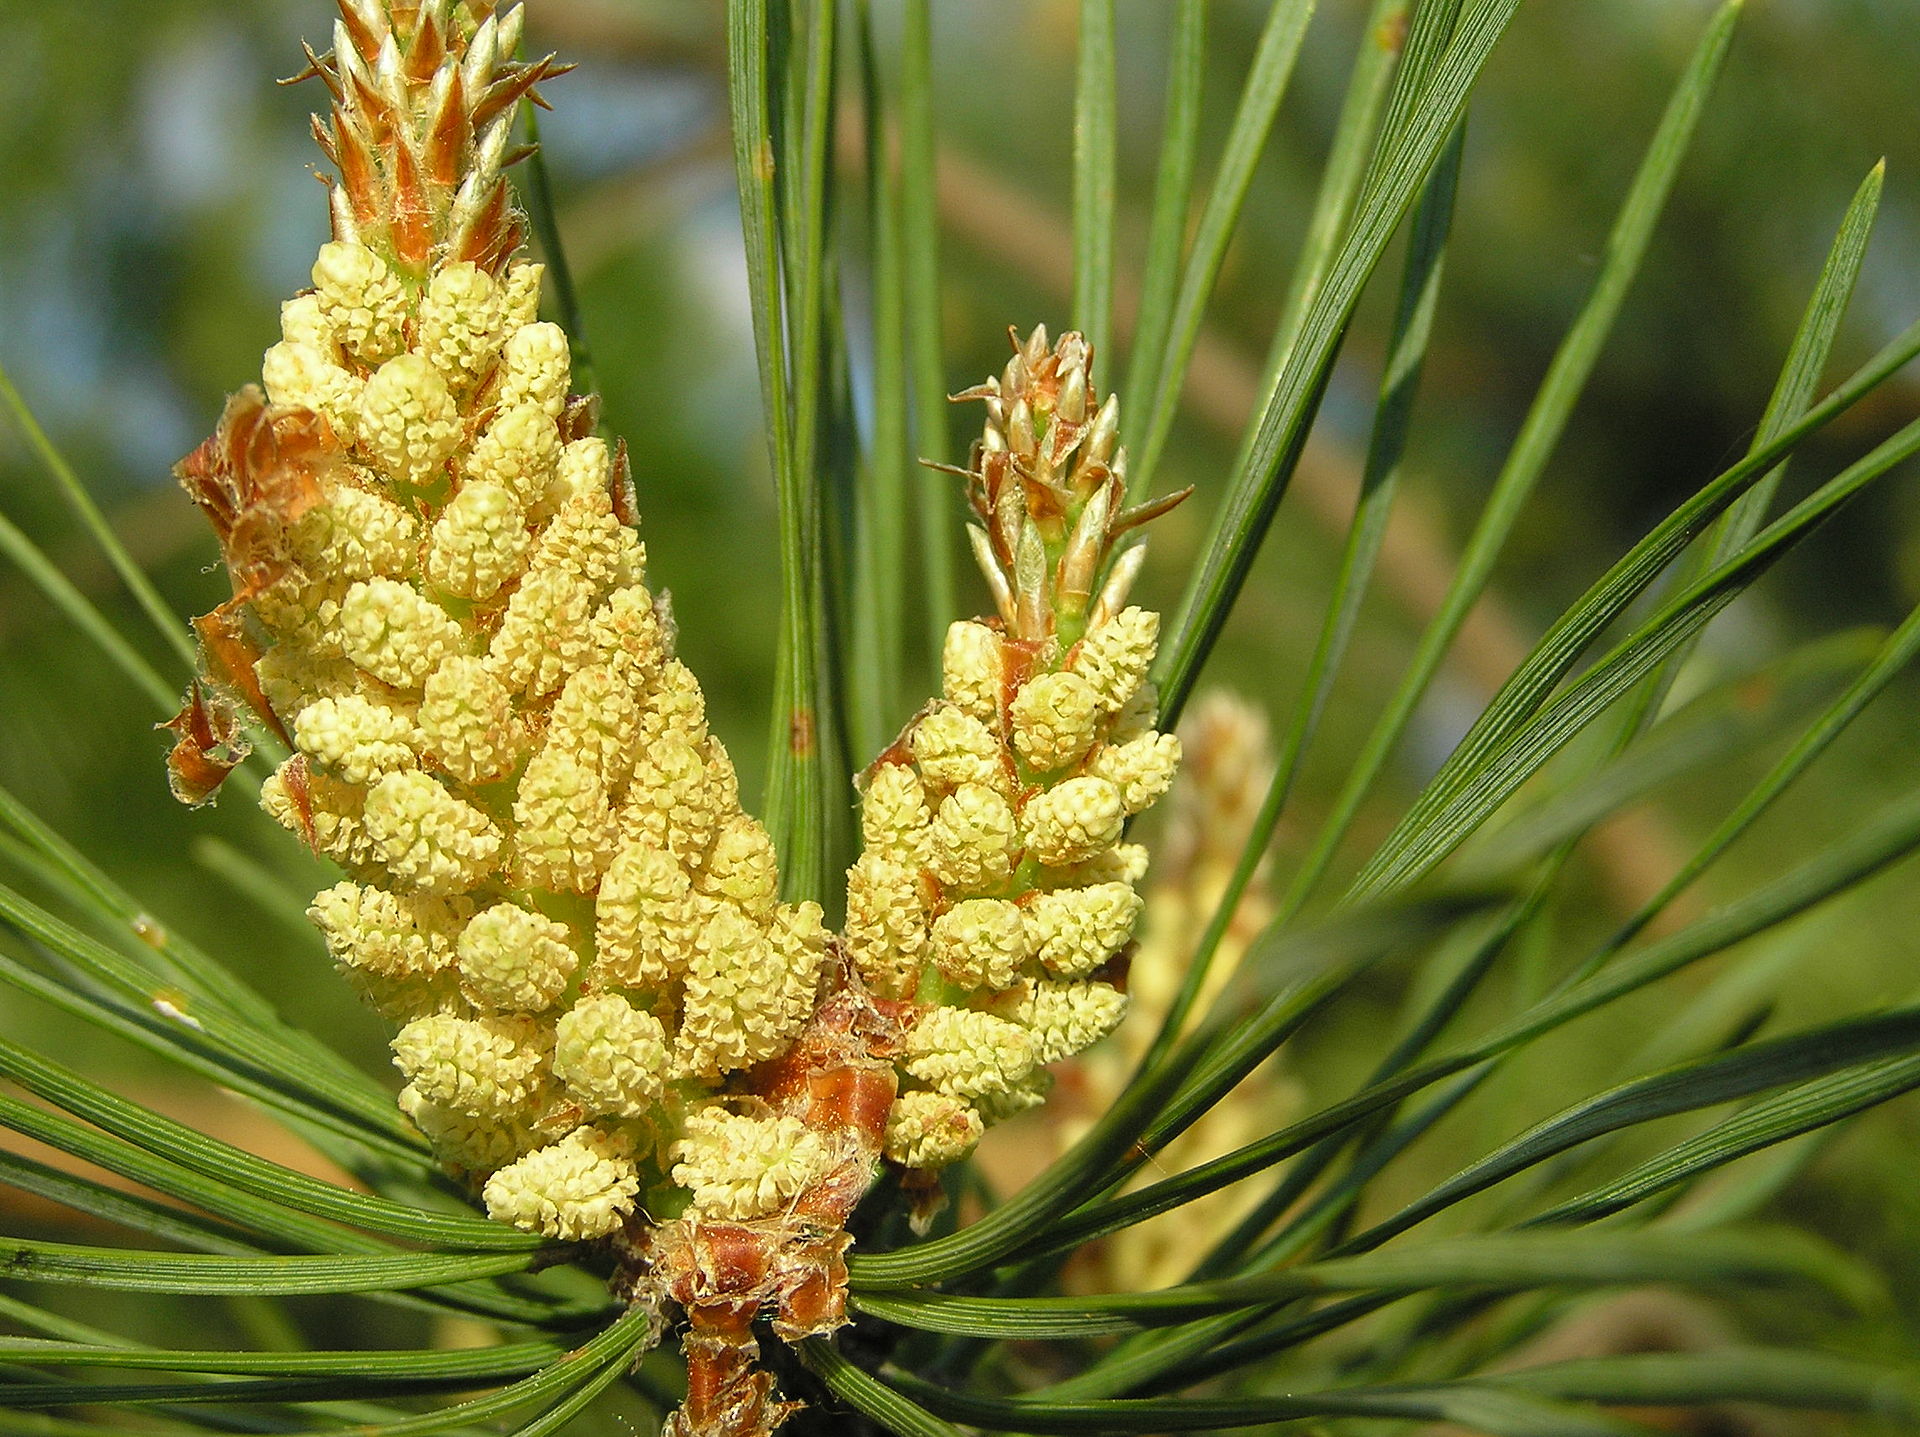 Two clusters of small pollen cones at the tip of a pine branch